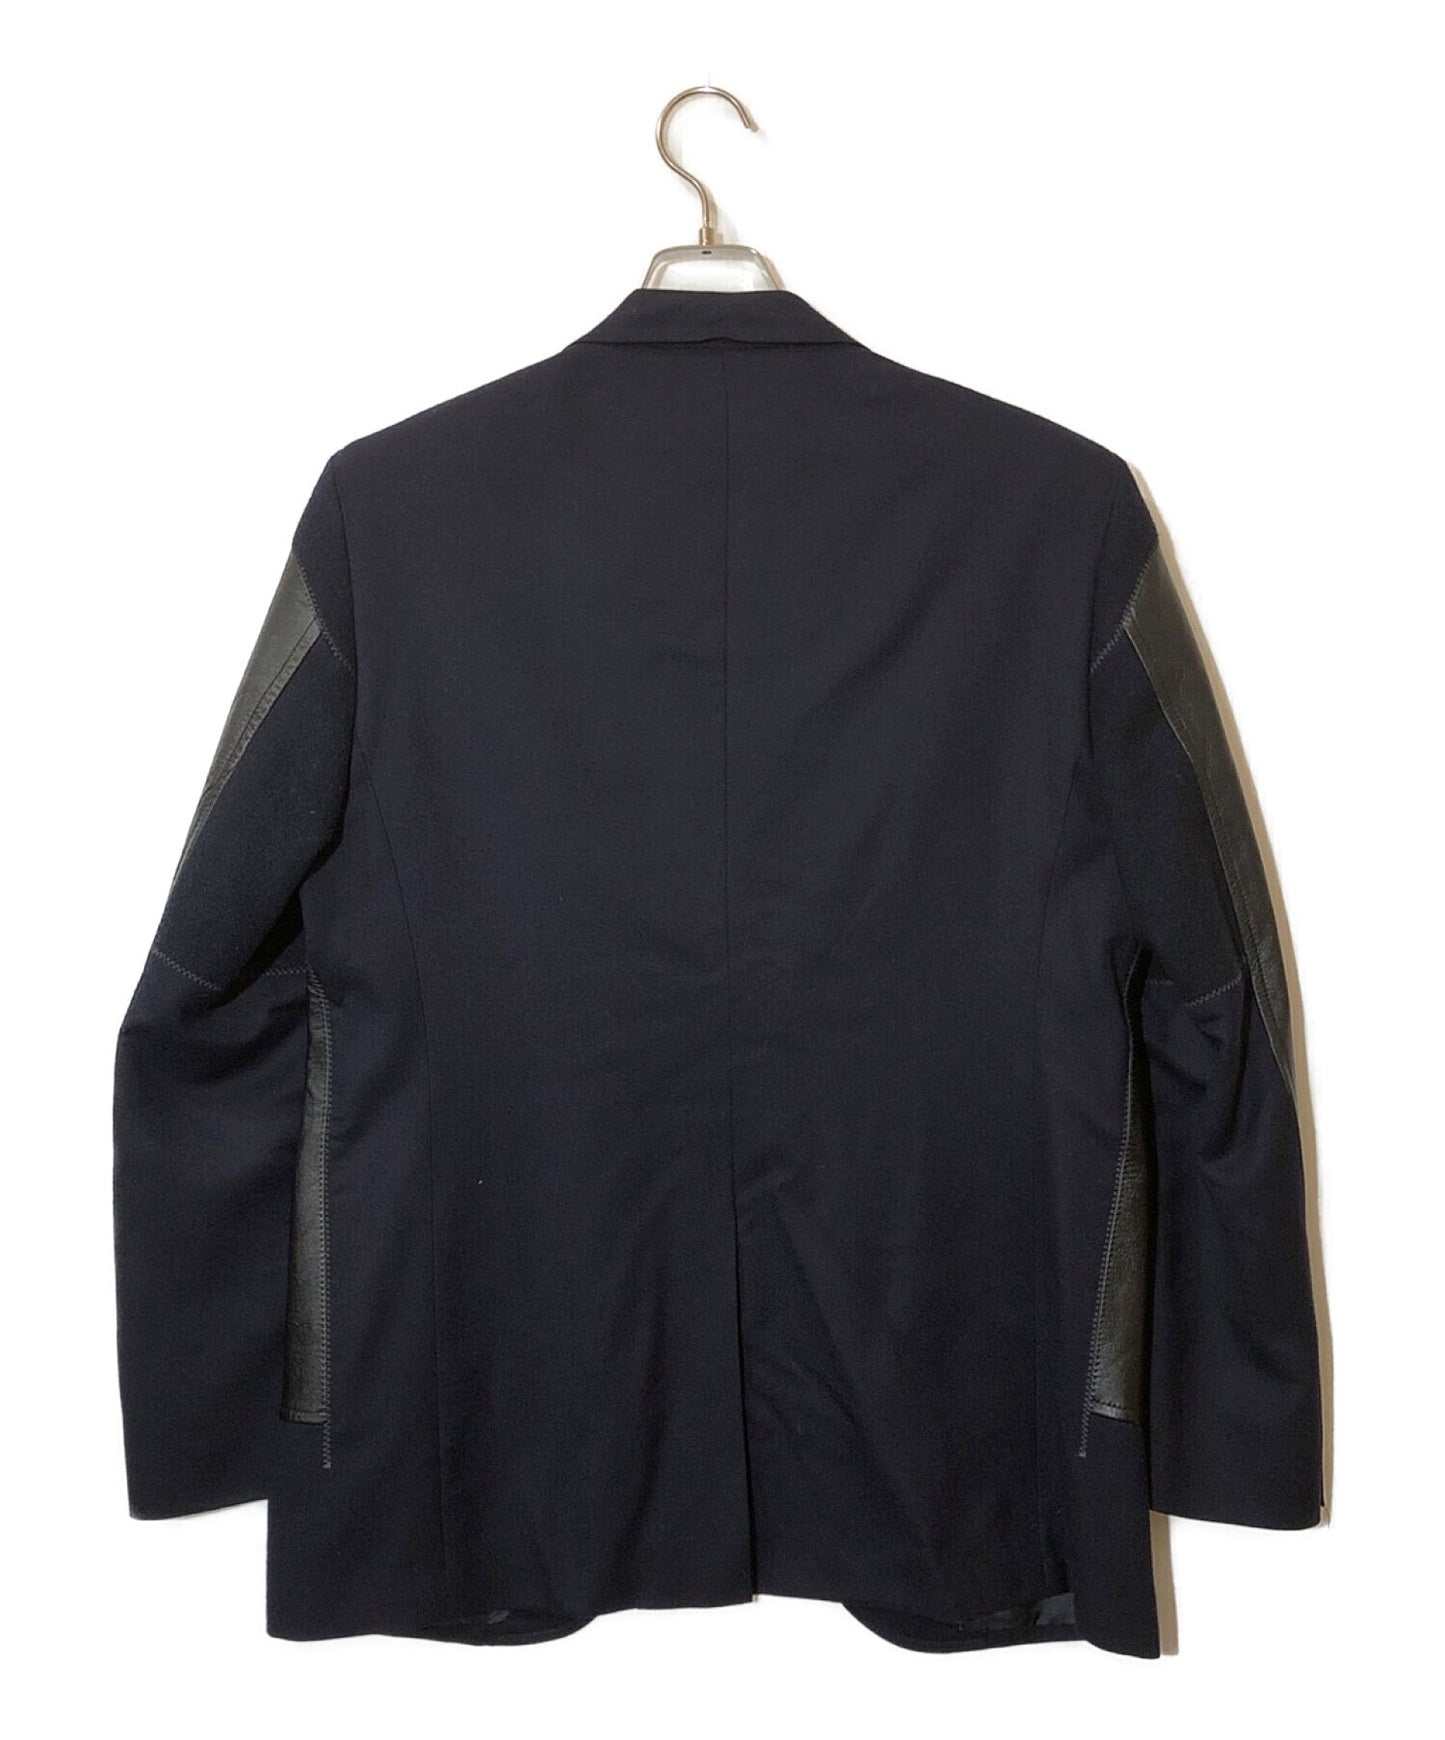 [Pre-owned] Brooks Brothers x COMME des GARCONS JUNYA WATANABE MAN Tailored Jacket with Leather Switching